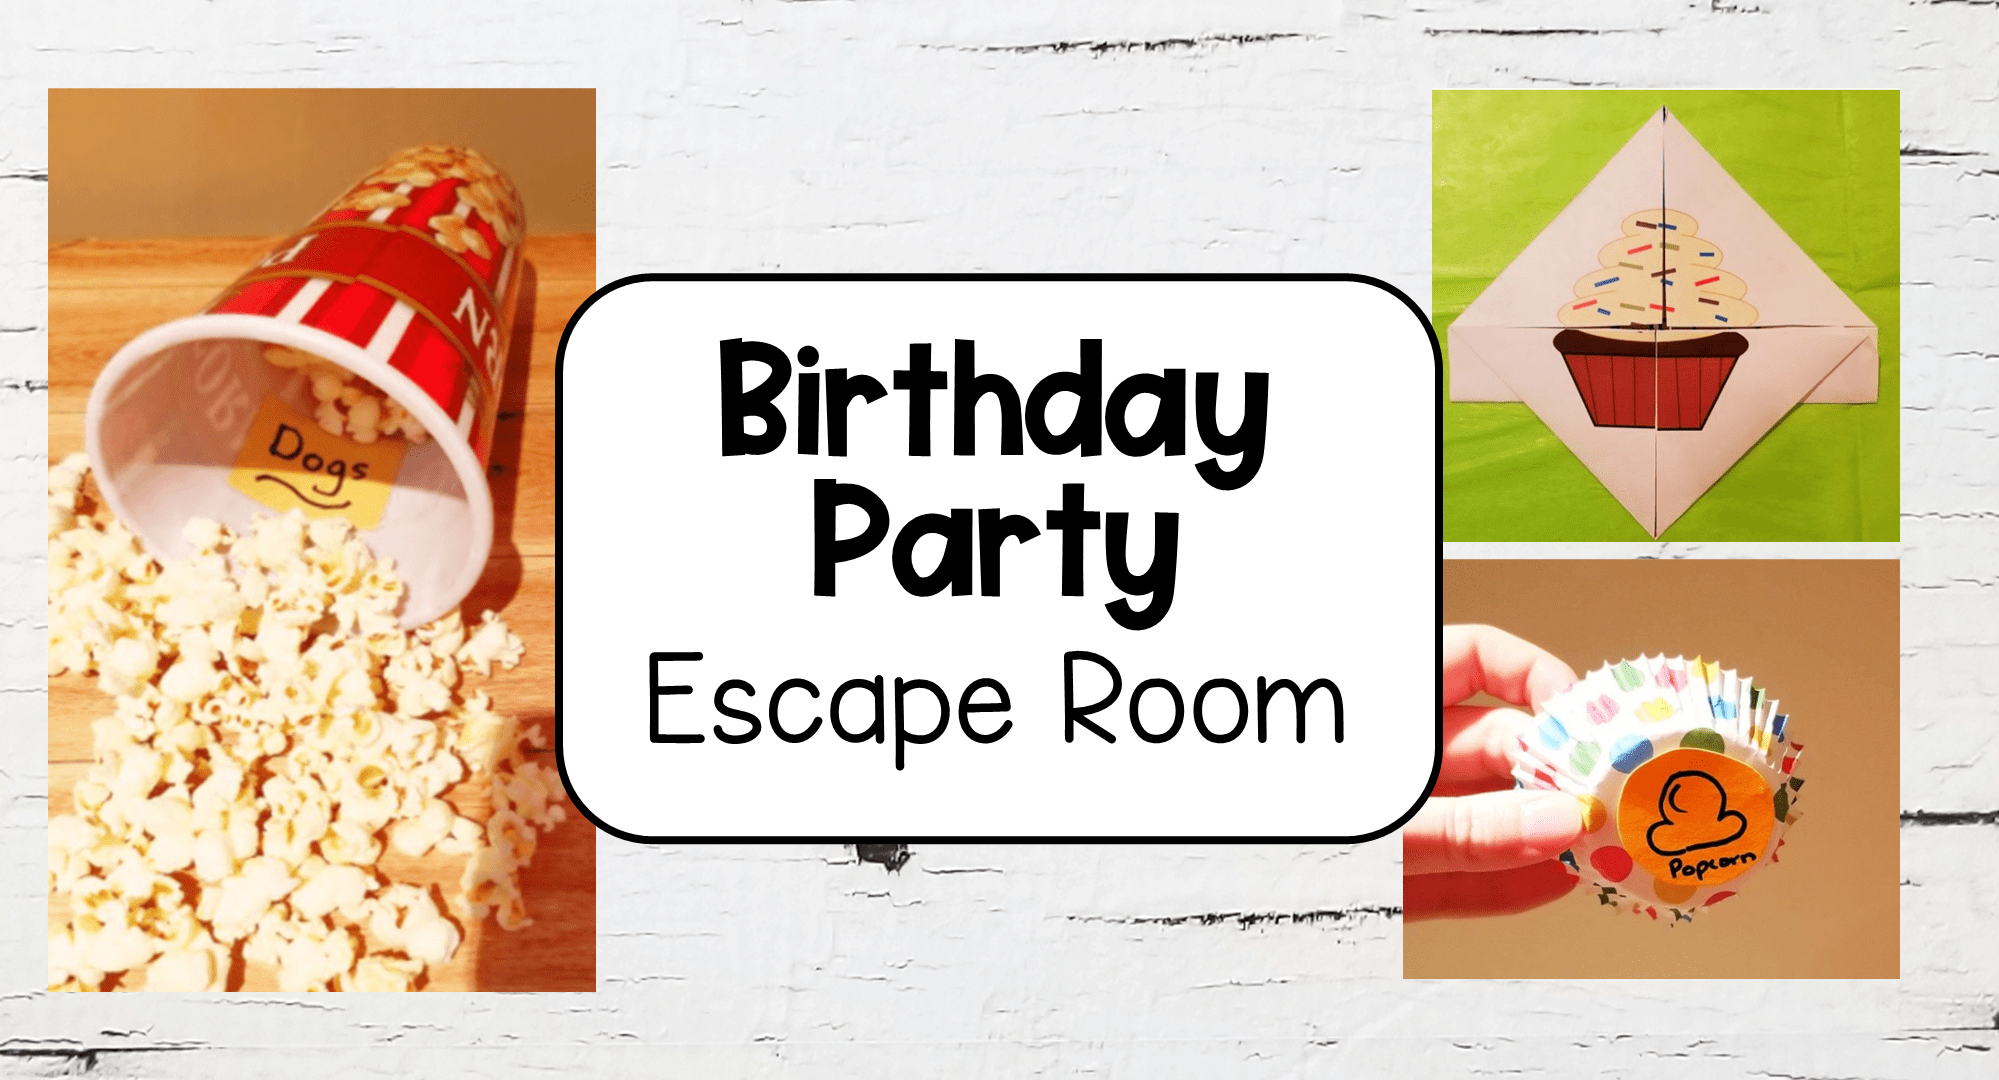 Birthday Party Escape Room for Kids at Home - Hands-On Teaching Ideas